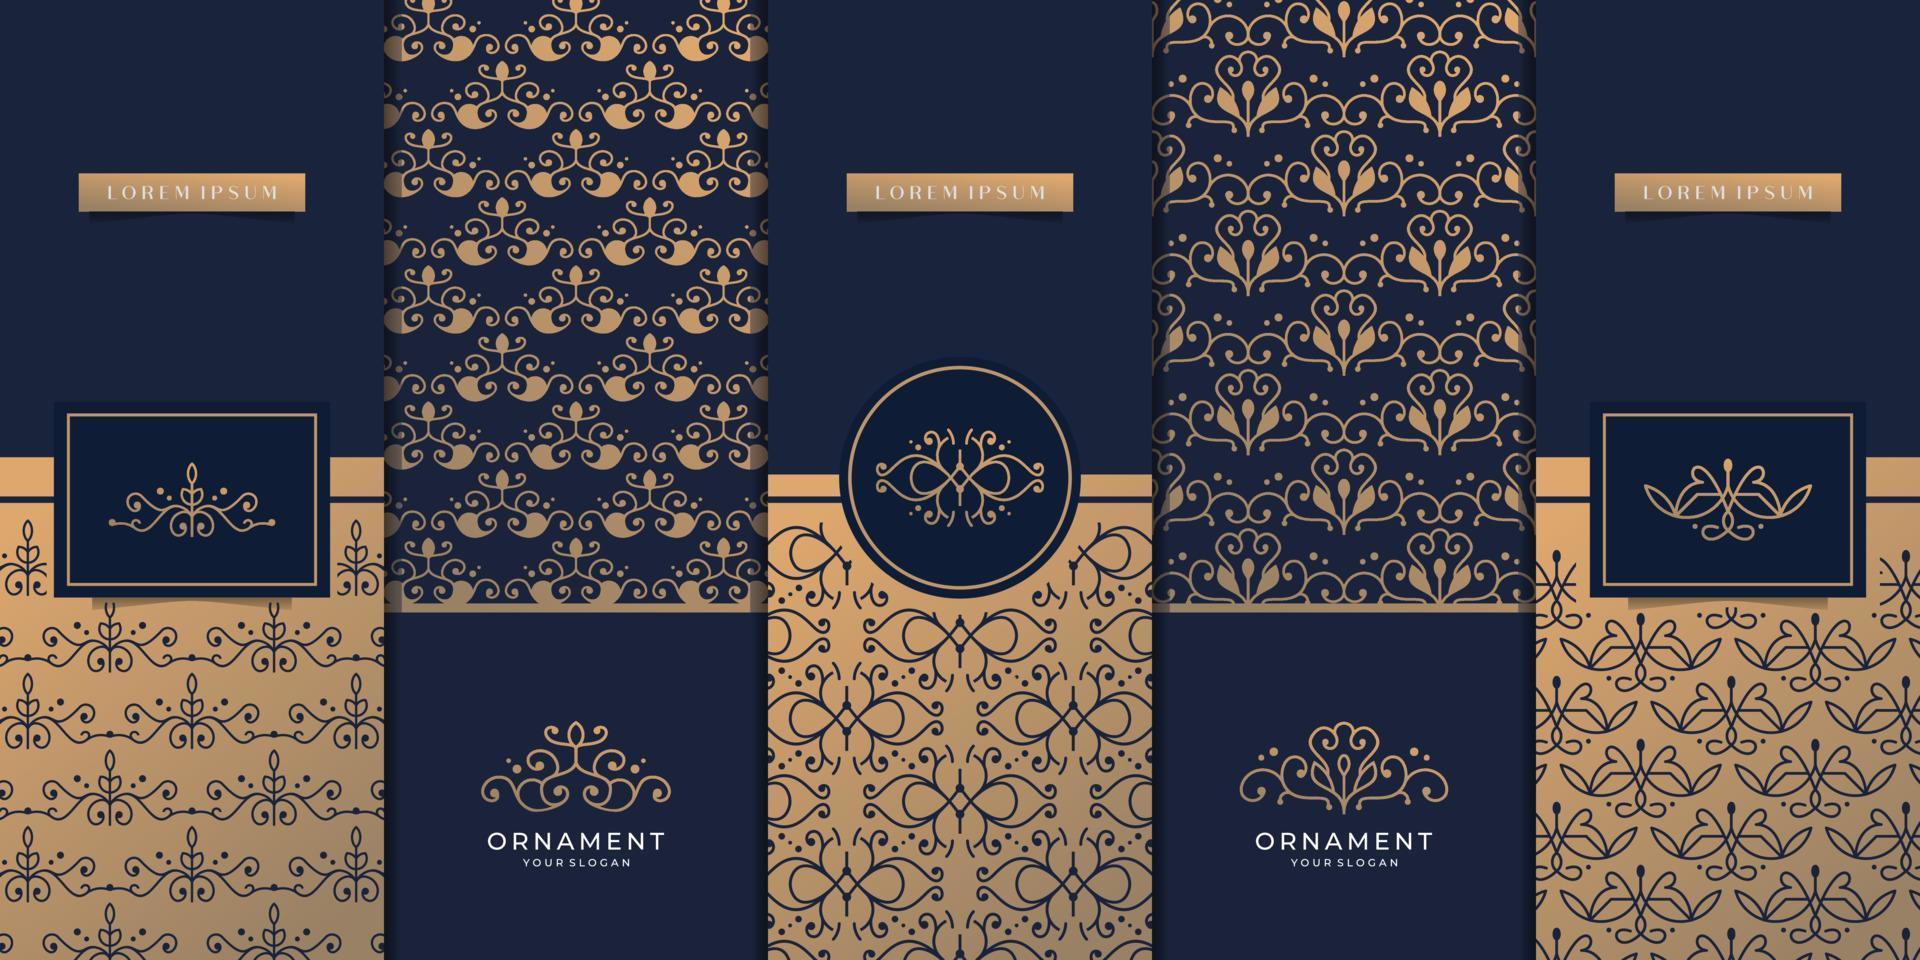 Collection of design elements,labels,icon,frames, for packaging,design of luxury products.Made with golden foil.Isolated vertical card on dark and gold background. vector illustration